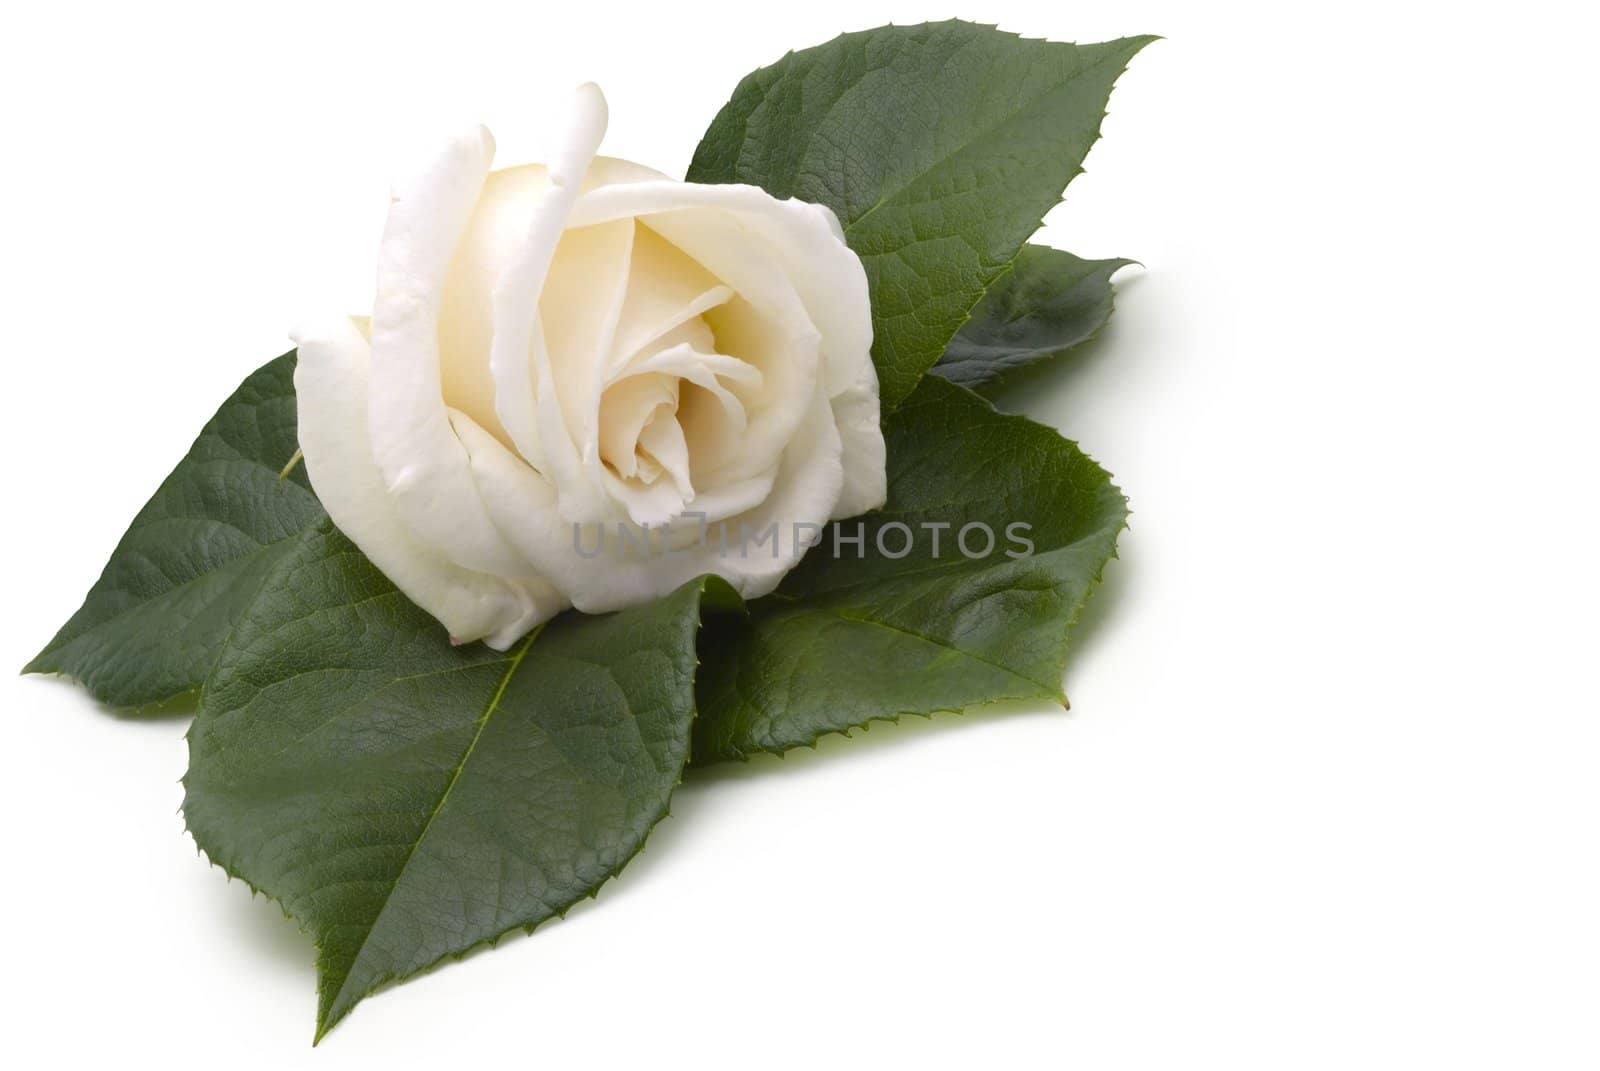 Beautiful creamy white rose on a bed of rose leaves by jmci